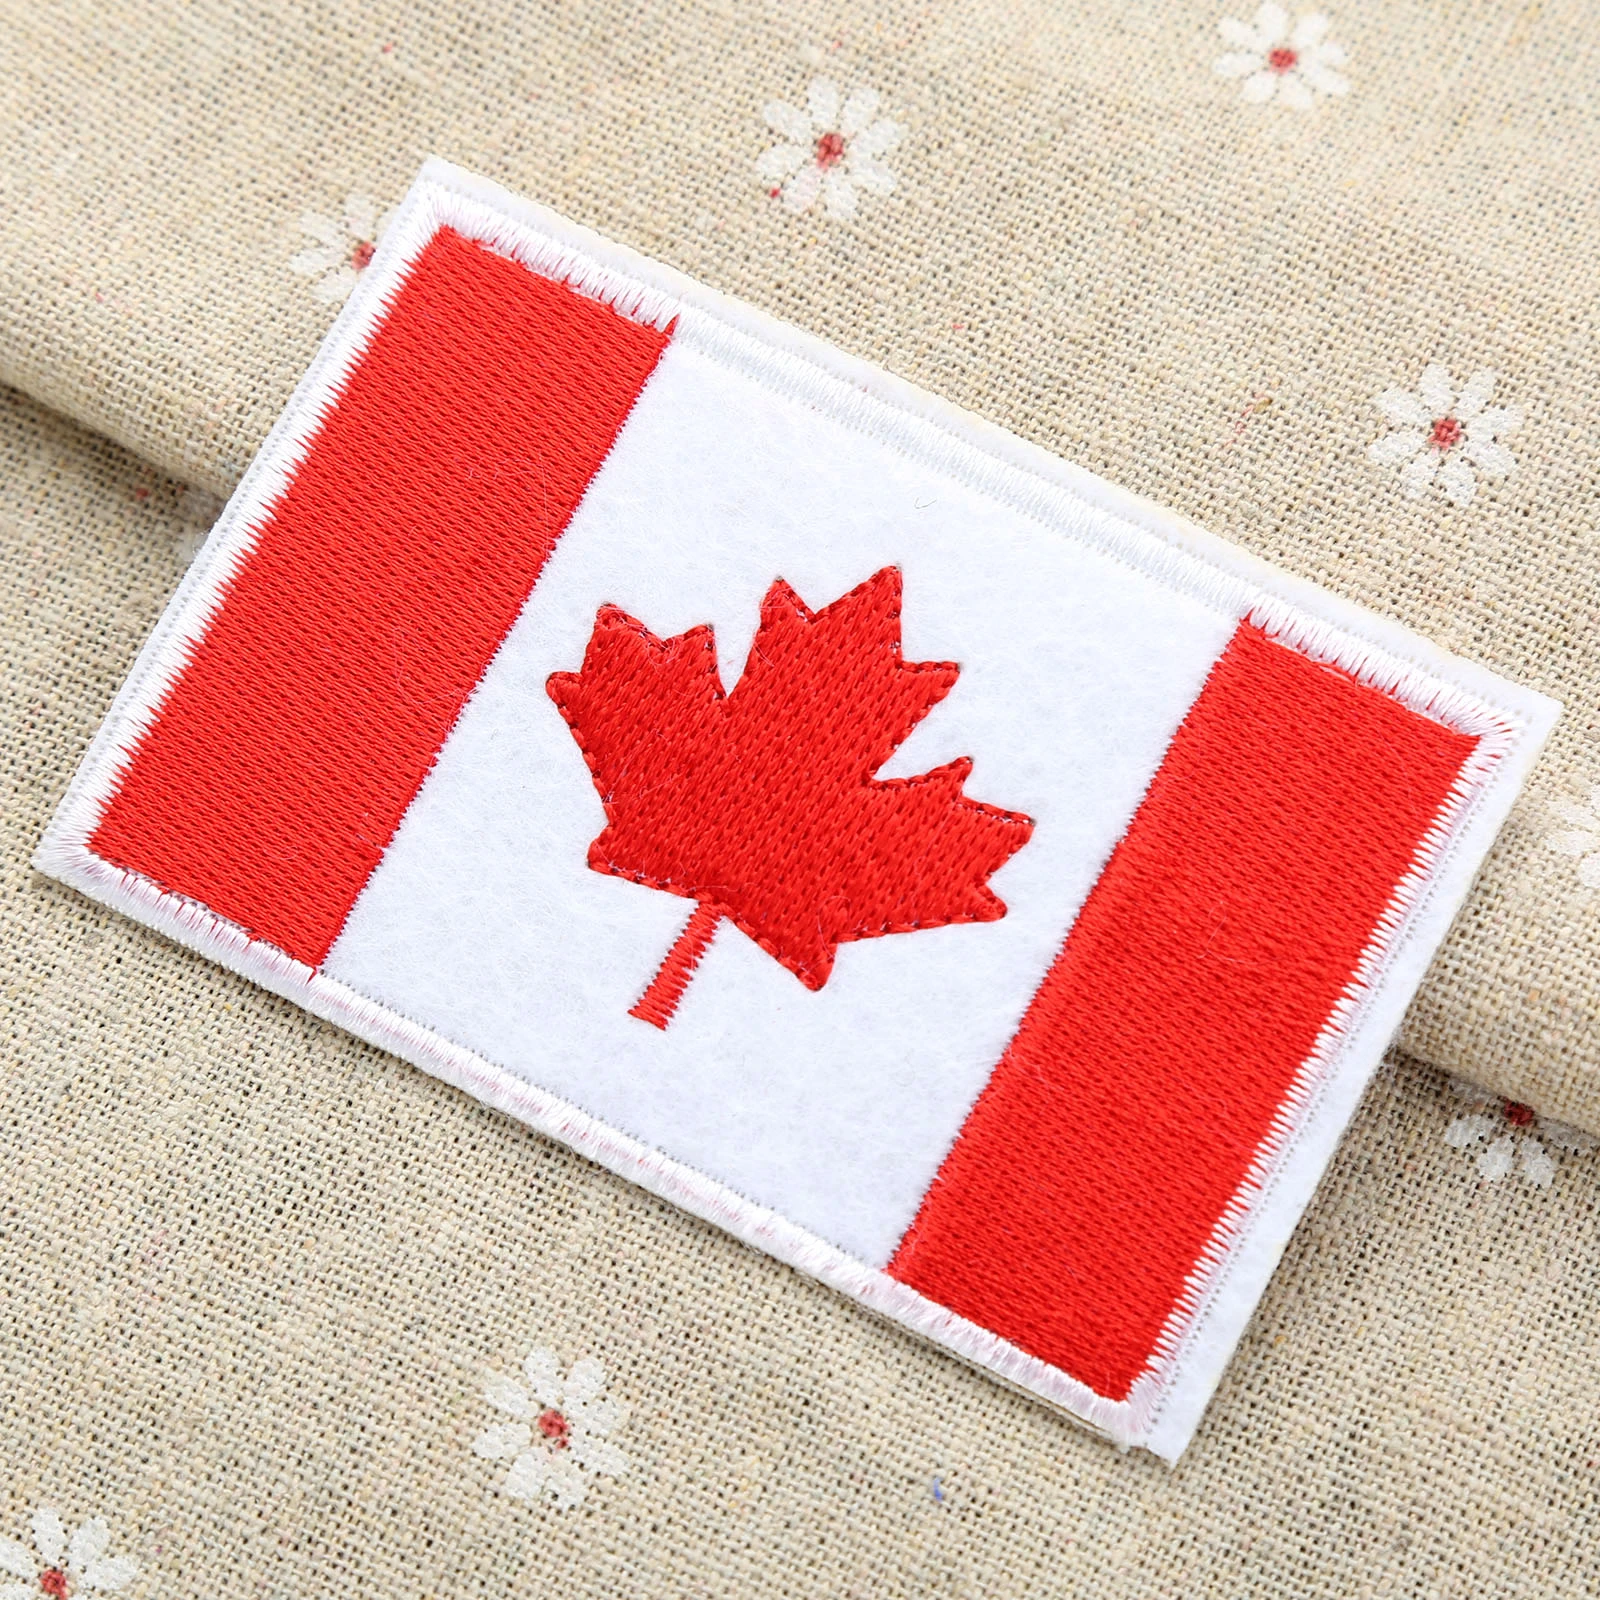 Canada Canadian Country Flag Fashion Embroidered Patches For Clothes Iron  On Patch Girl's Idea Deal With Clothing - Patches - AliExpress